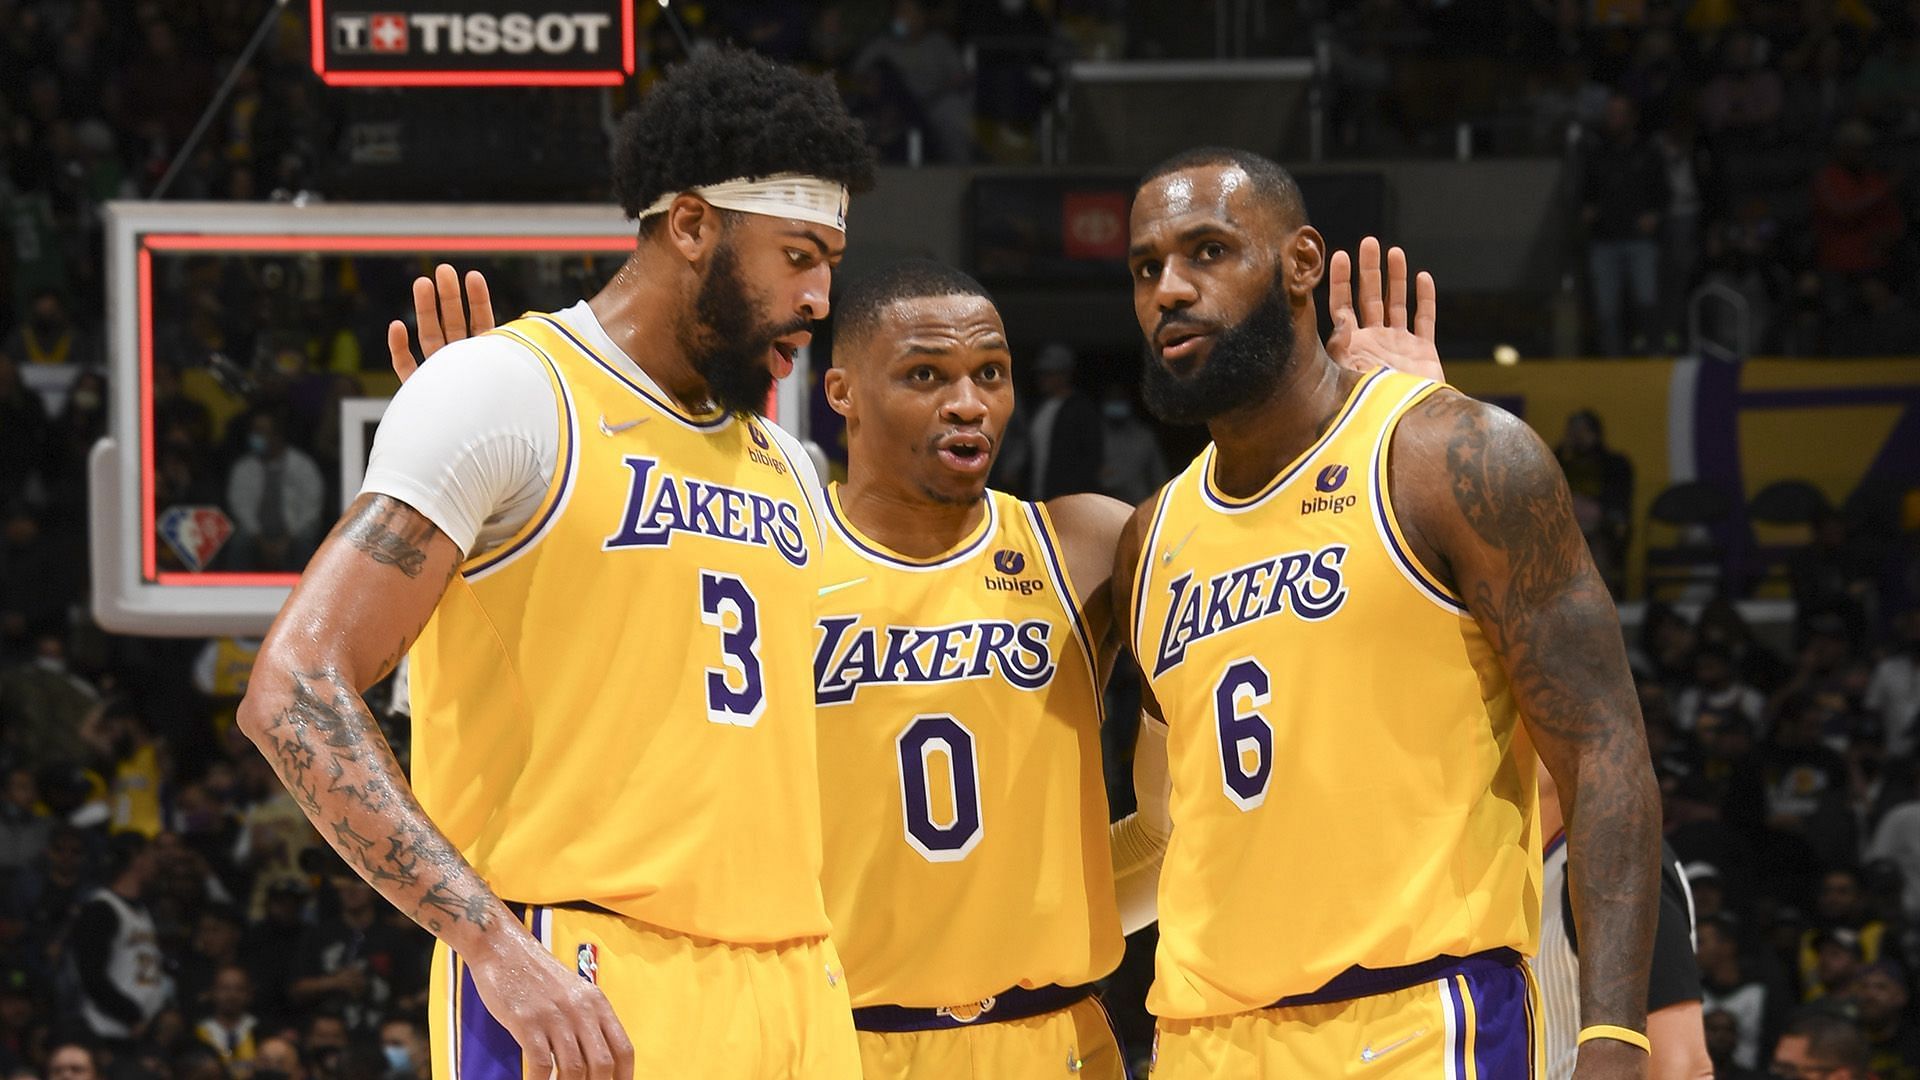 Rock bottom could still be on the horizon as the LA Lakers have one of the toughest schedules left in the NBA. [Photo: NBA.com]